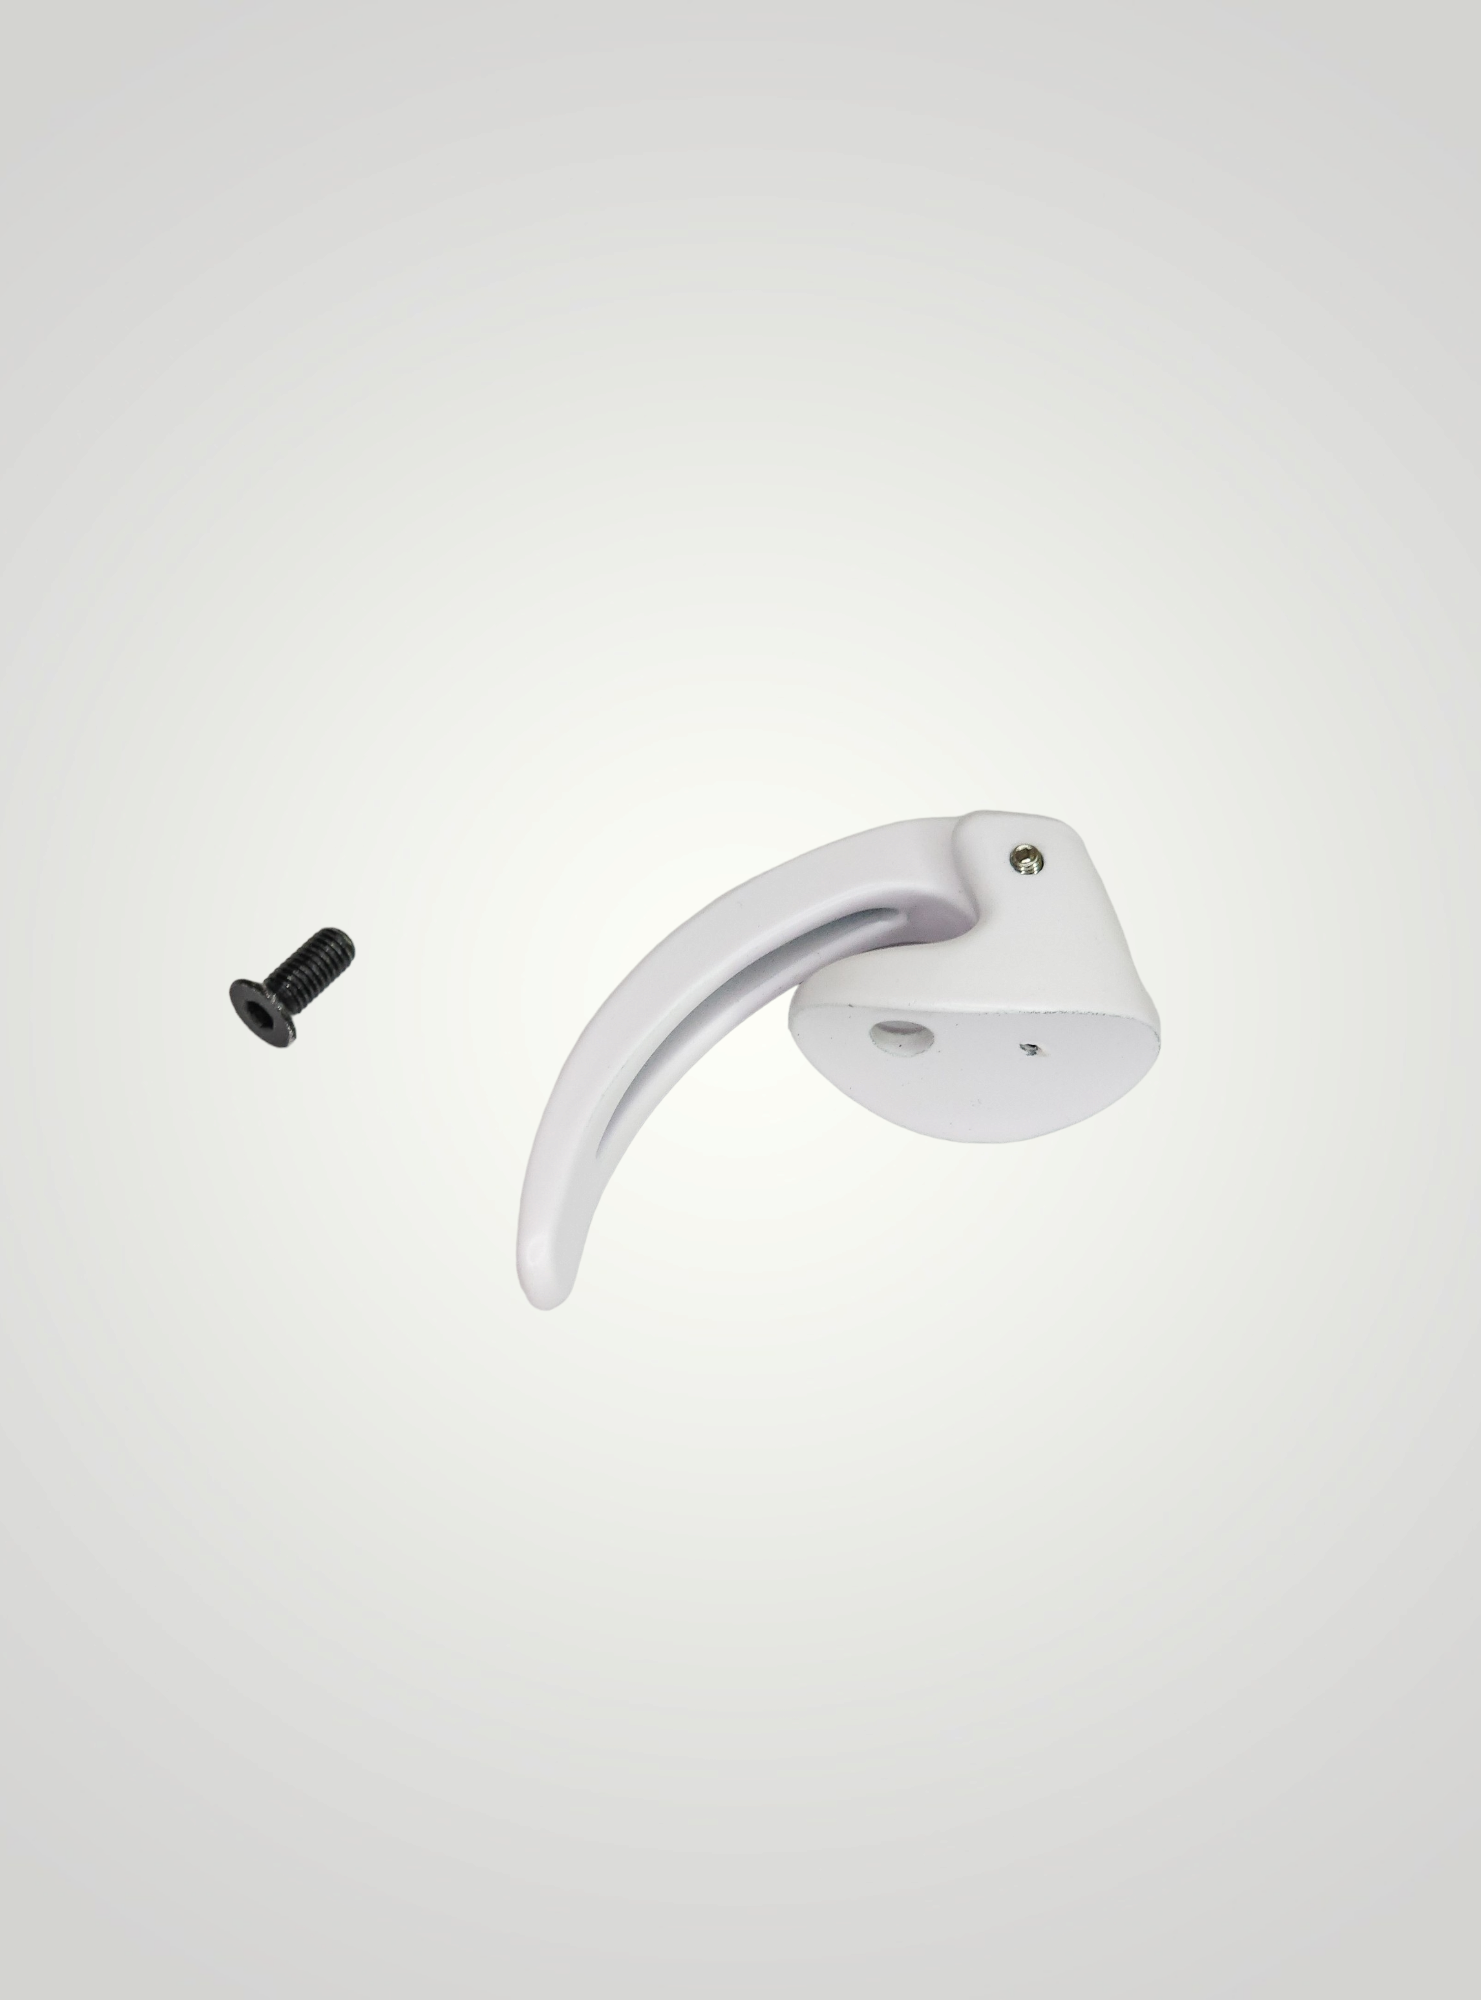 WiLEE Xiaomi M365 Electric Scooter Metal Hook Mounting Kit, White 